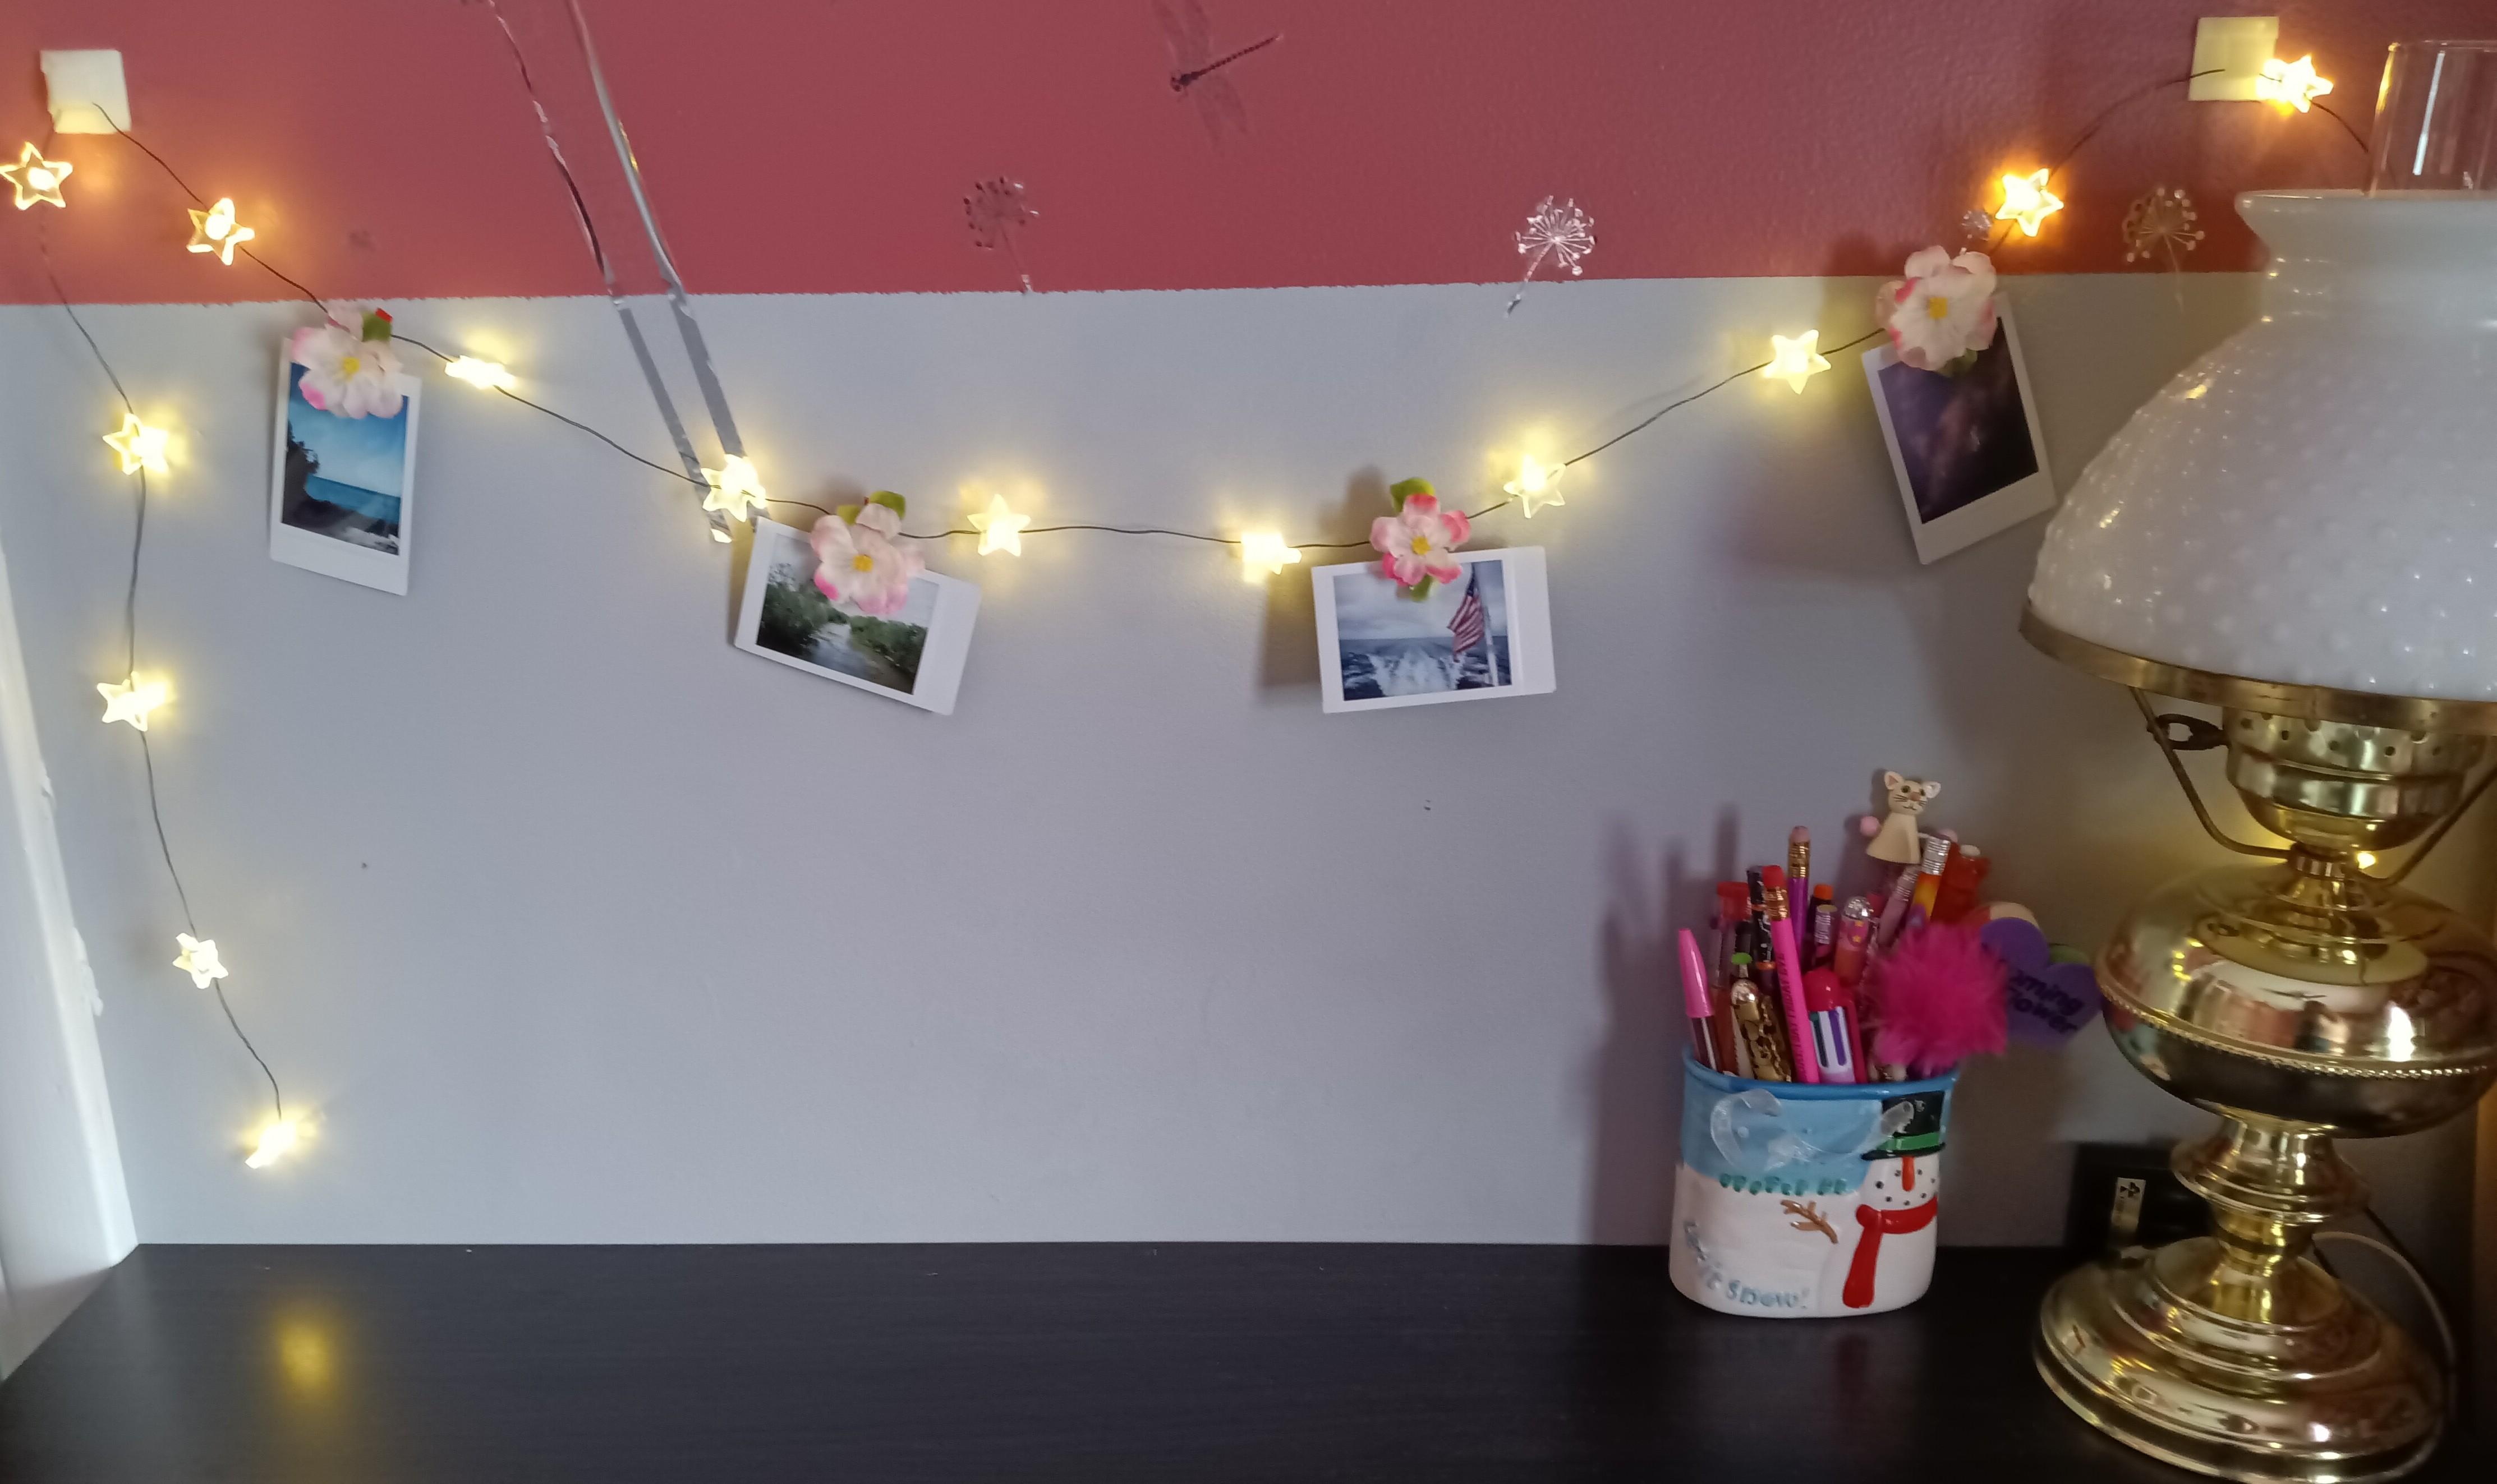 Decorative Clips to Hold Photos